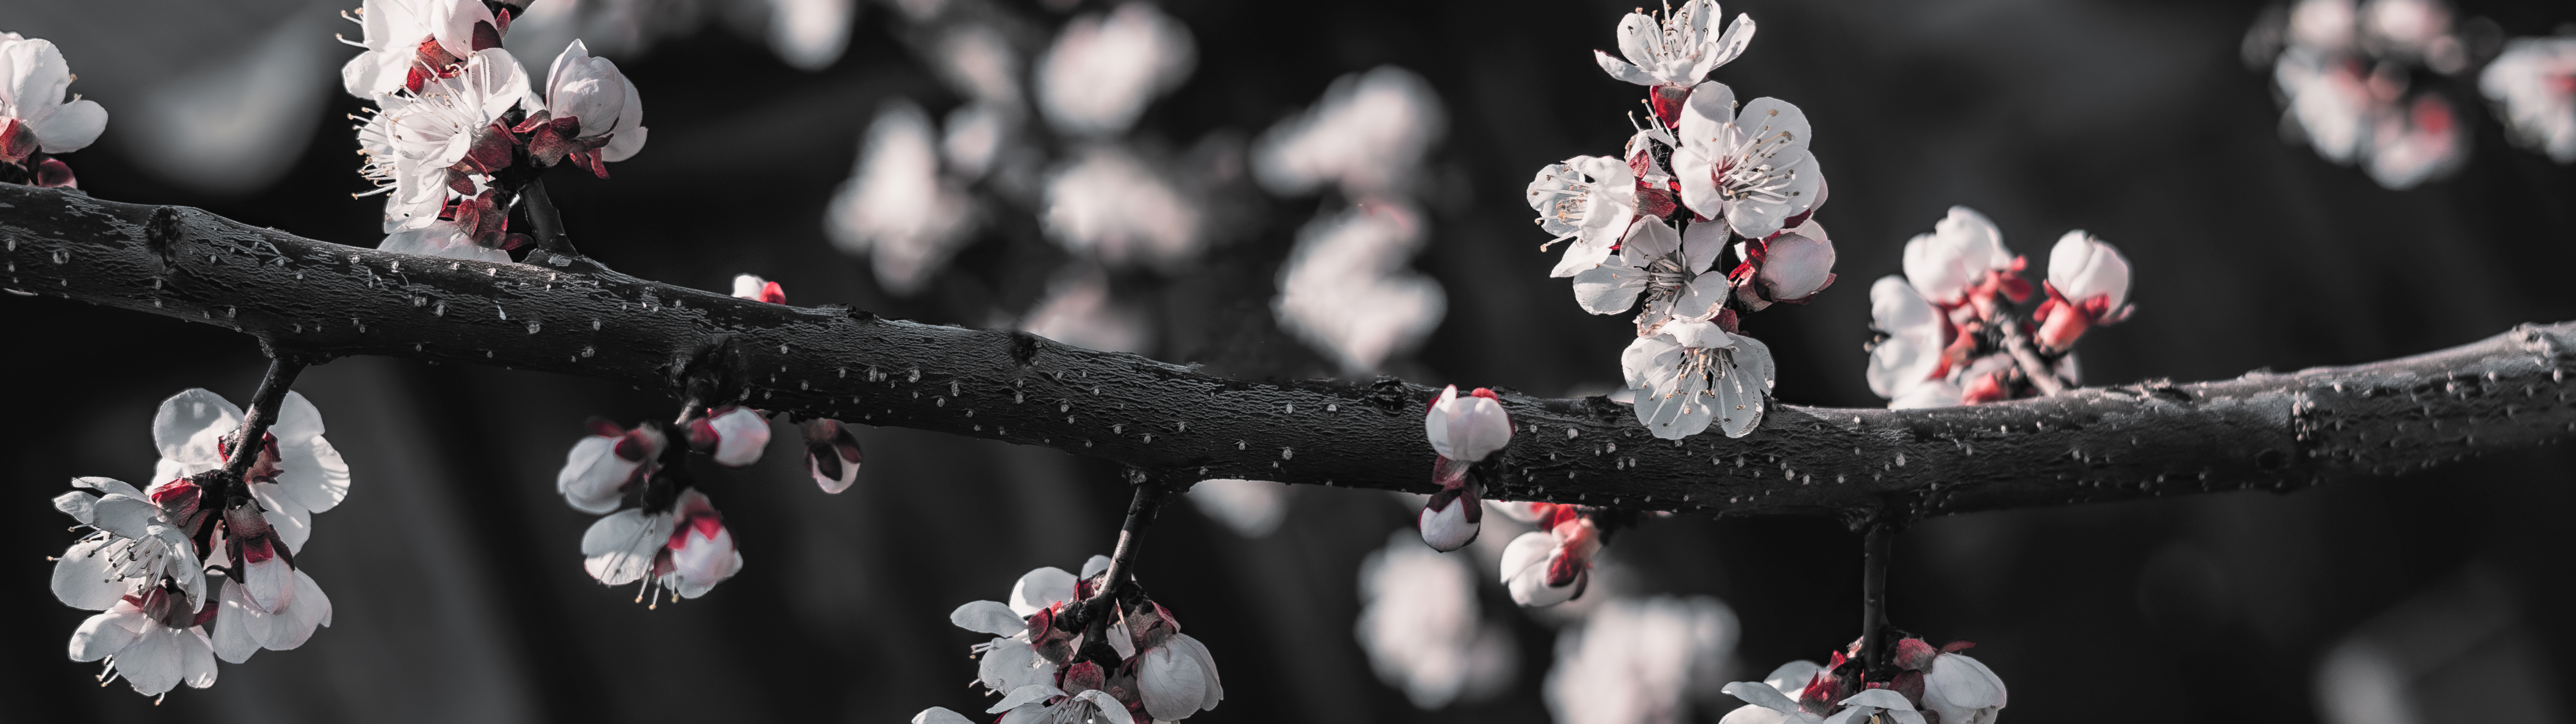 General 5120x1440 nature flowers branch blurred blurry background closeup cherry blossom bokeh